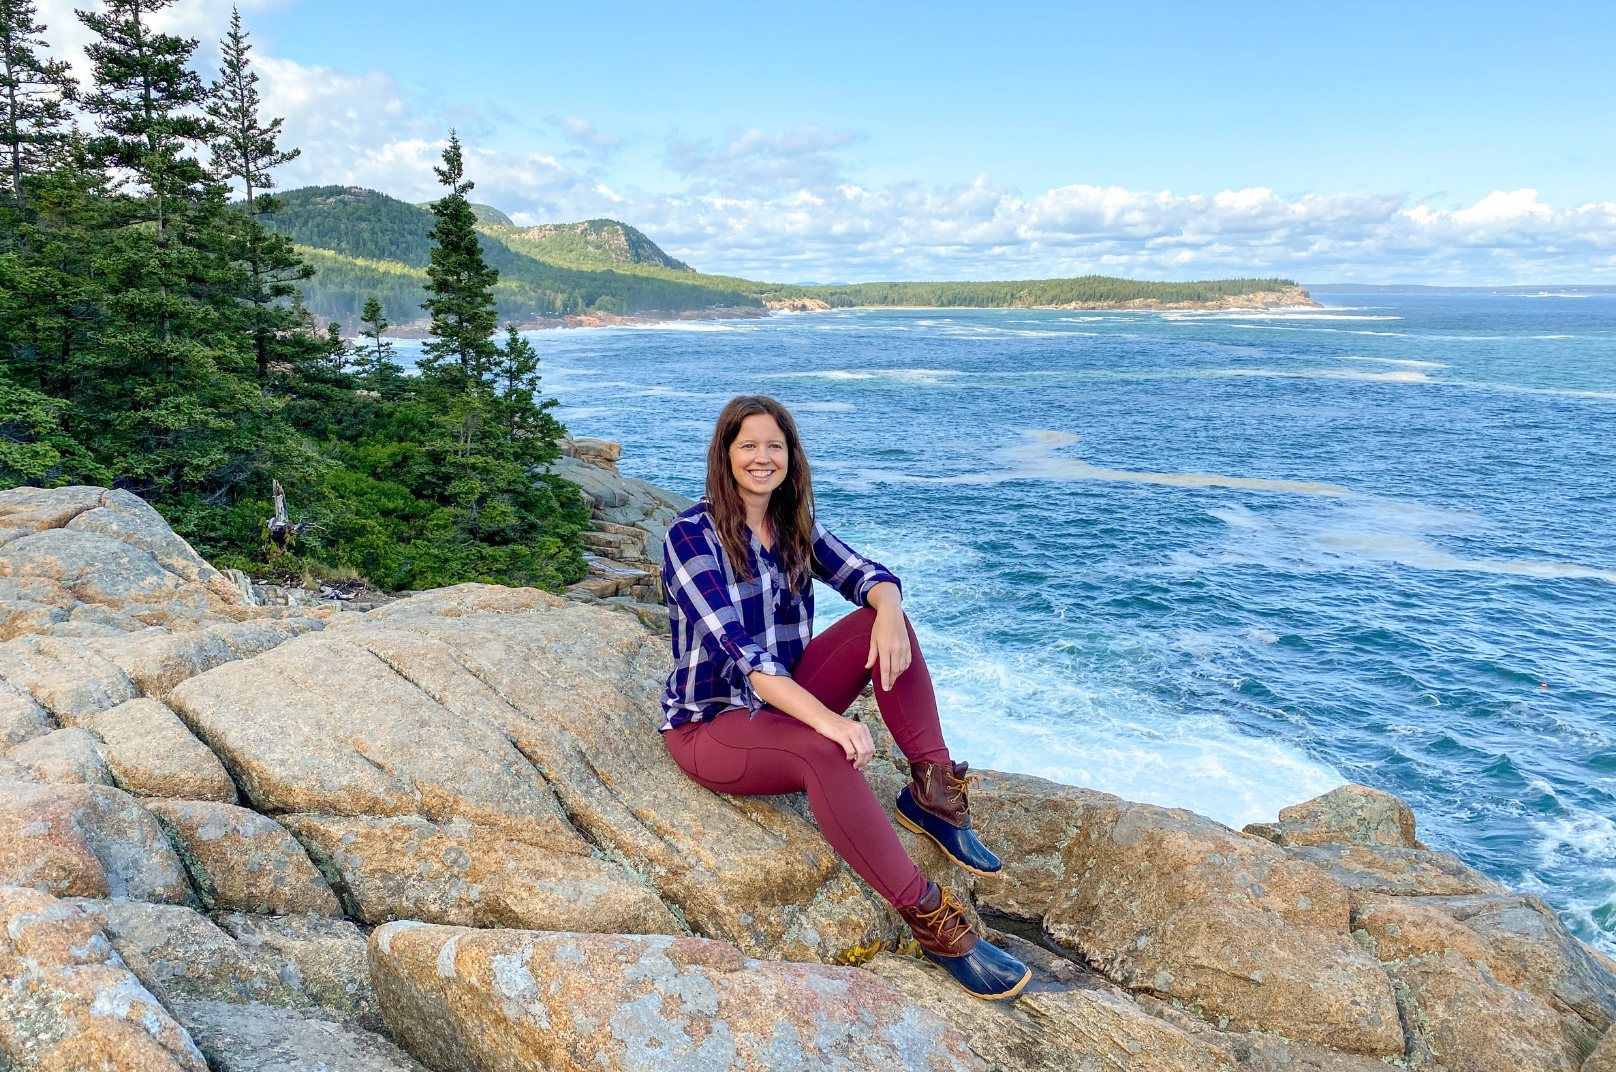 Planning a Trip to Acadia National Park